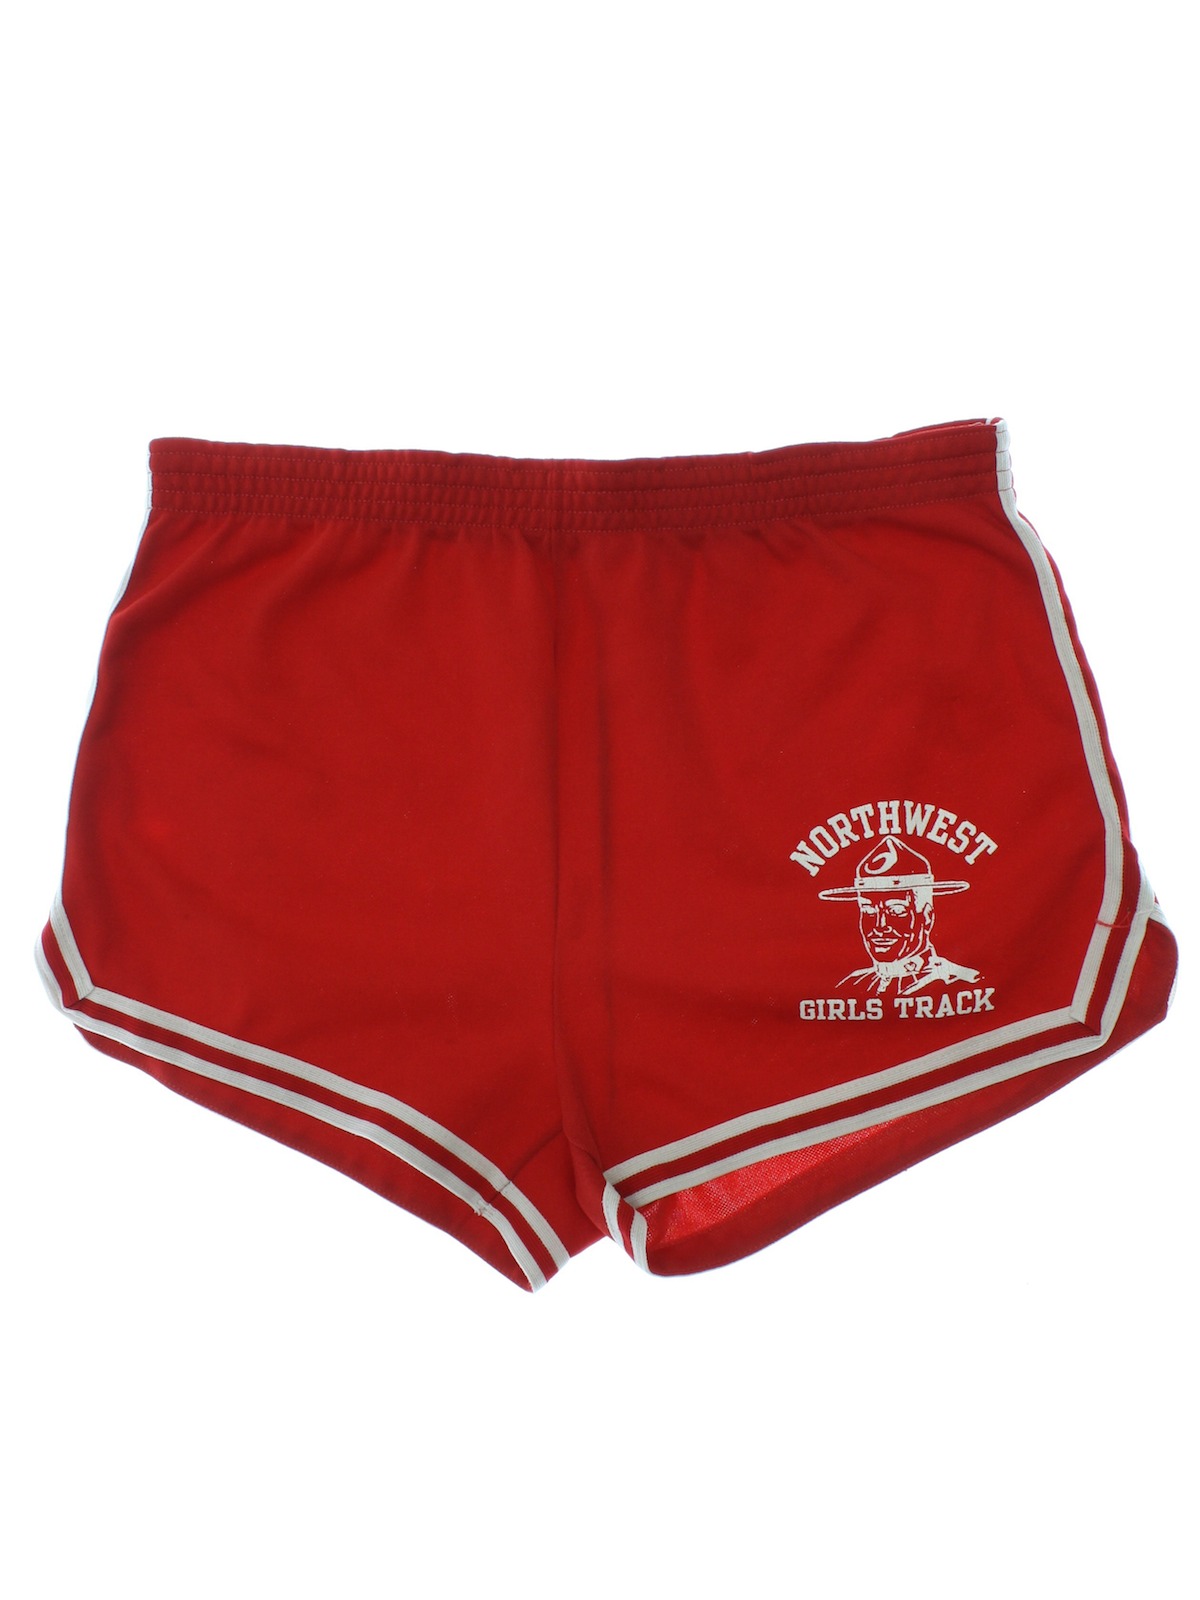 Retro Eighties Shorts: 80s -Missing Label- Womens red background stretch nylon running shorts ...